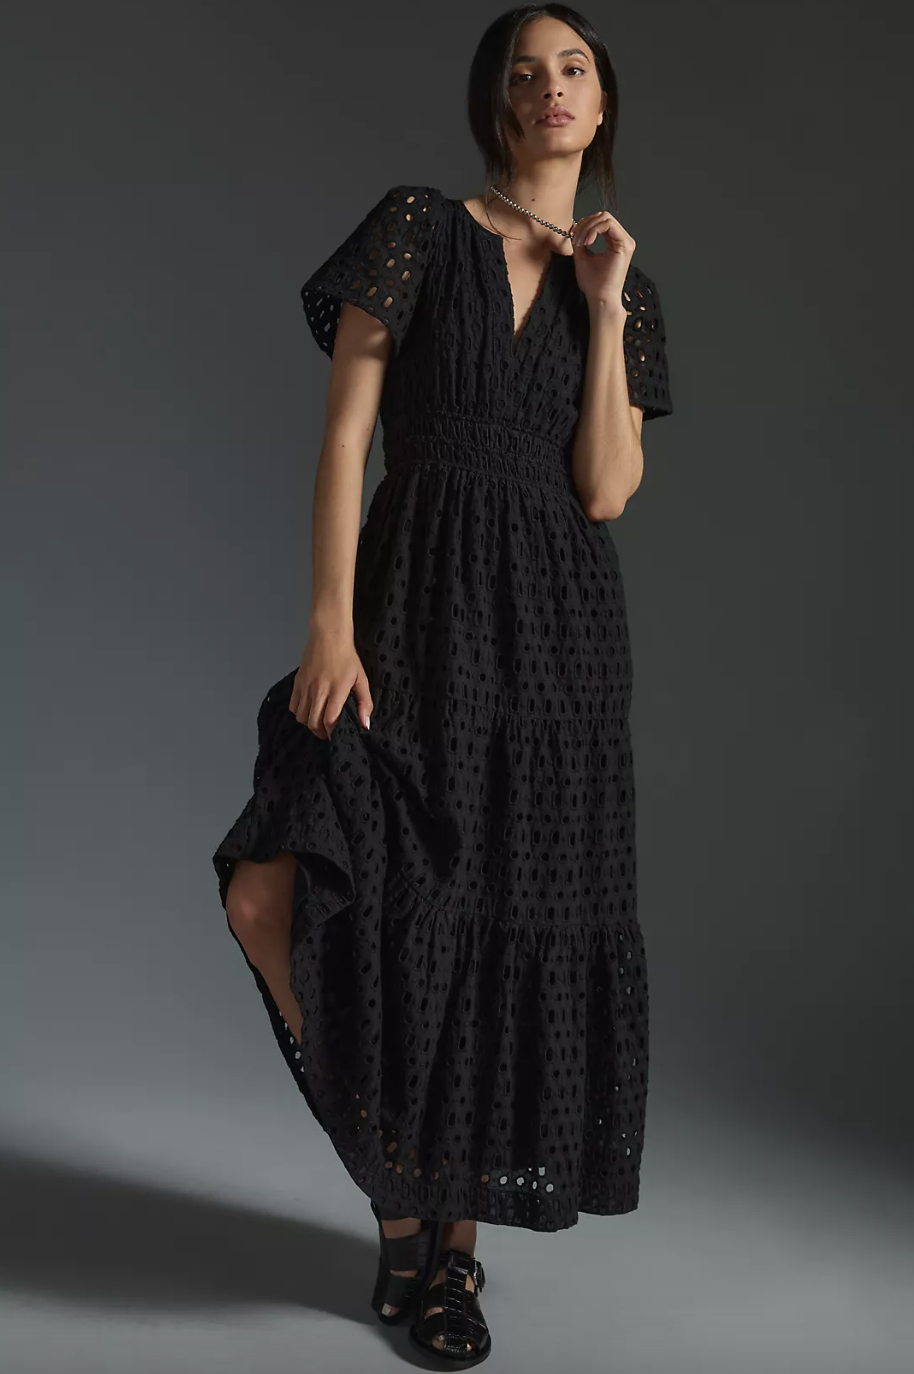 model wearing black sandals and black The Somerset Maxi Dress: Eyelet Edition (photo via Anthropologie)